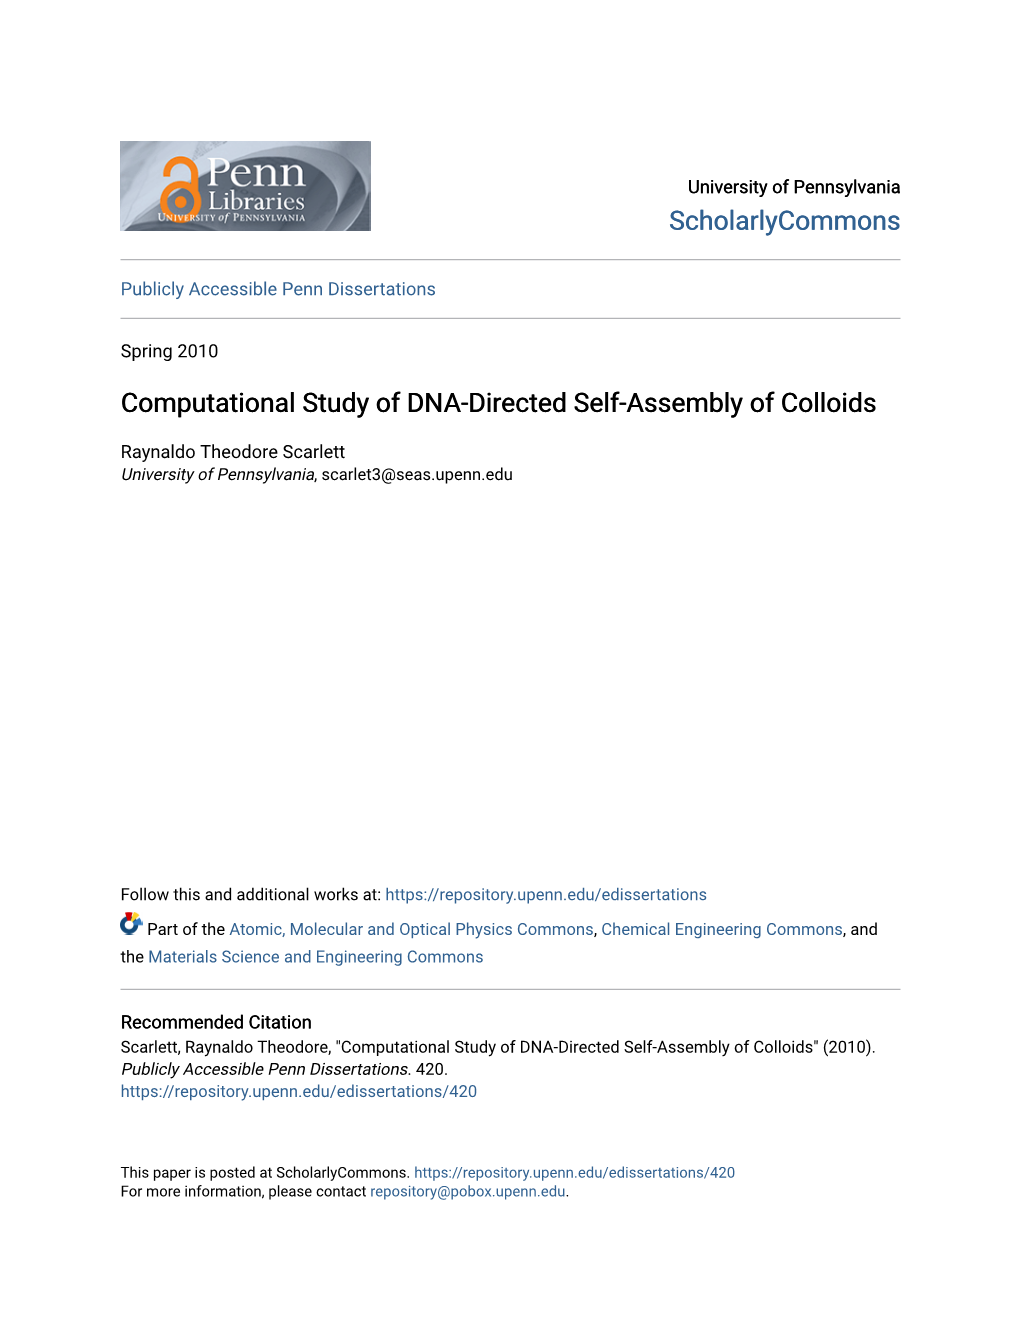 Computational Study of DNA-Directed Self-Assembly of Colloids